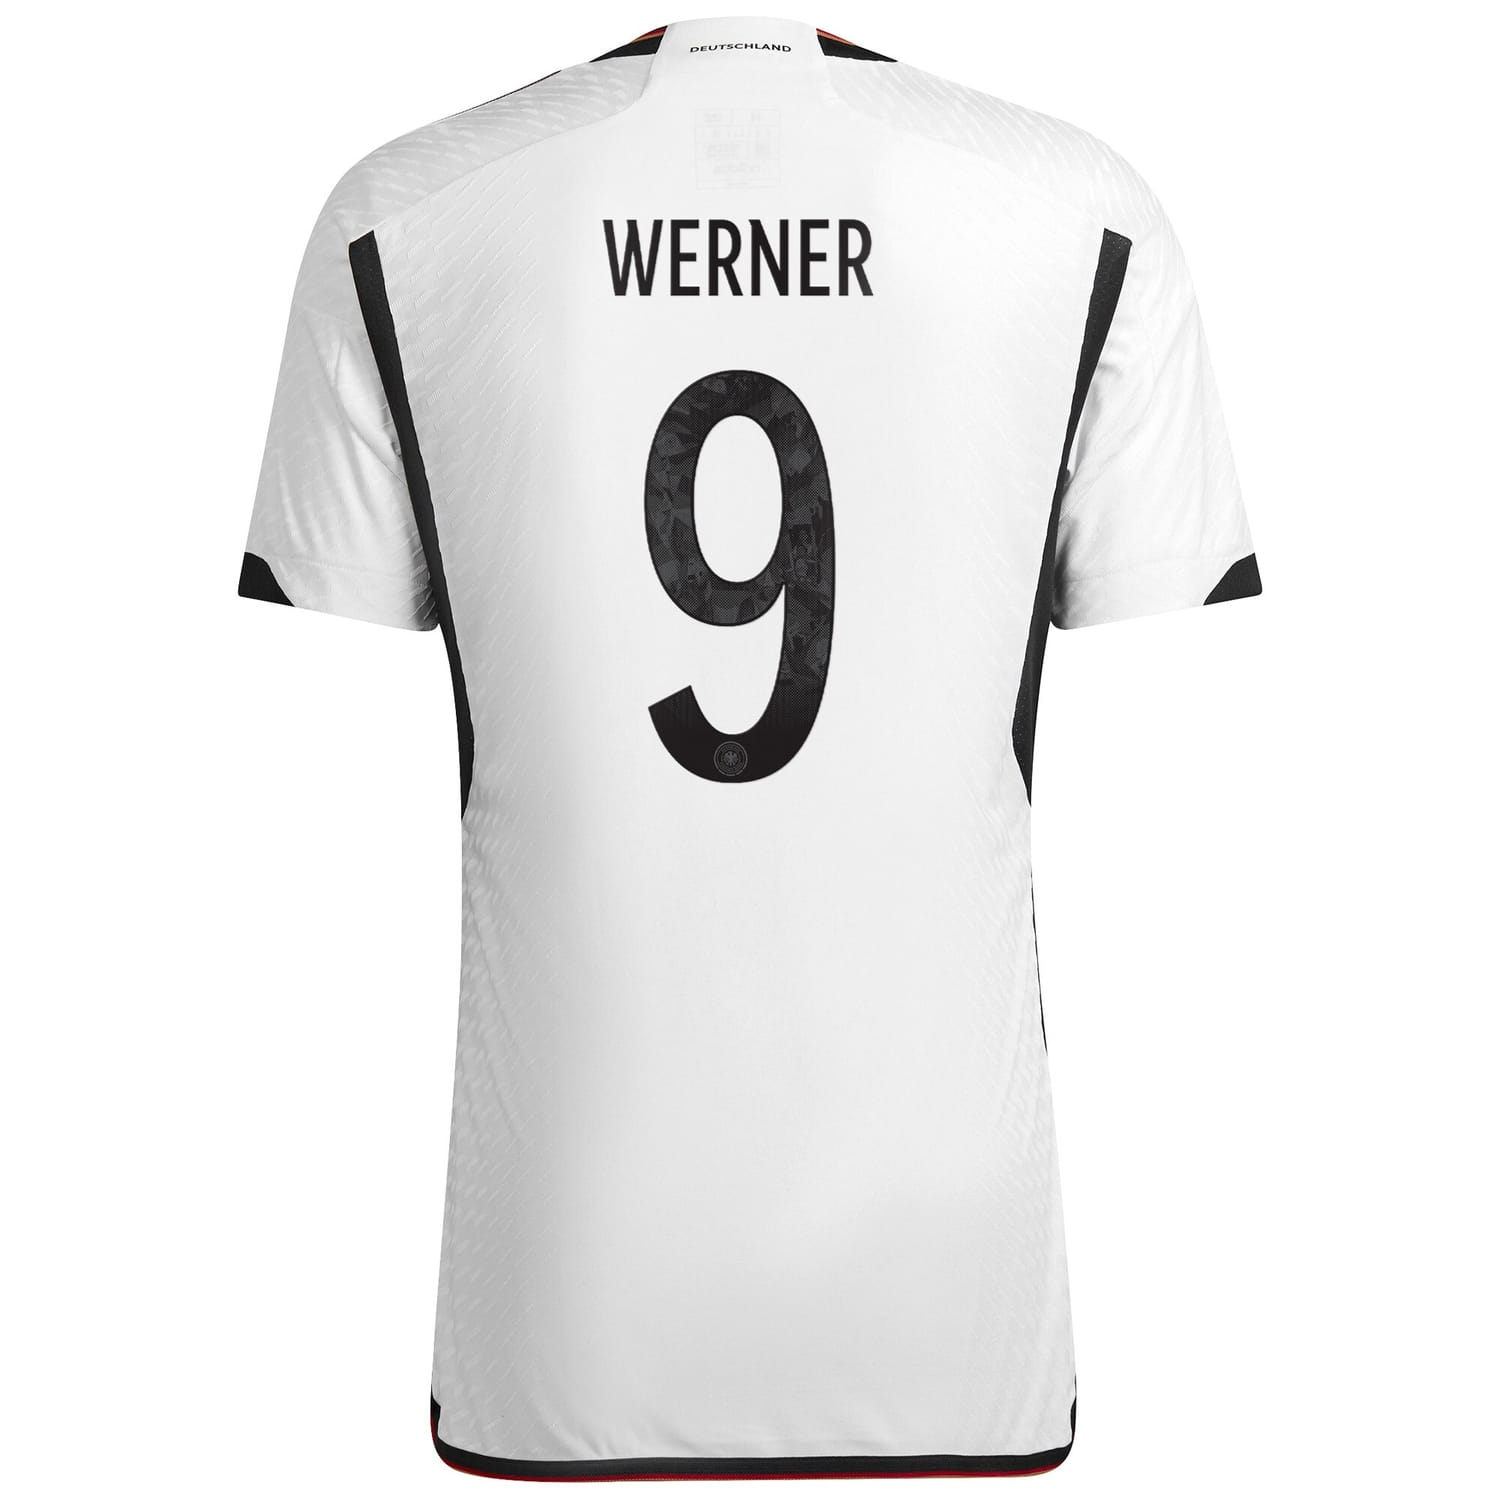 Germany National Team Home Authentic Jersey Shirt White 2022-23 player Timo Werner printing for Men